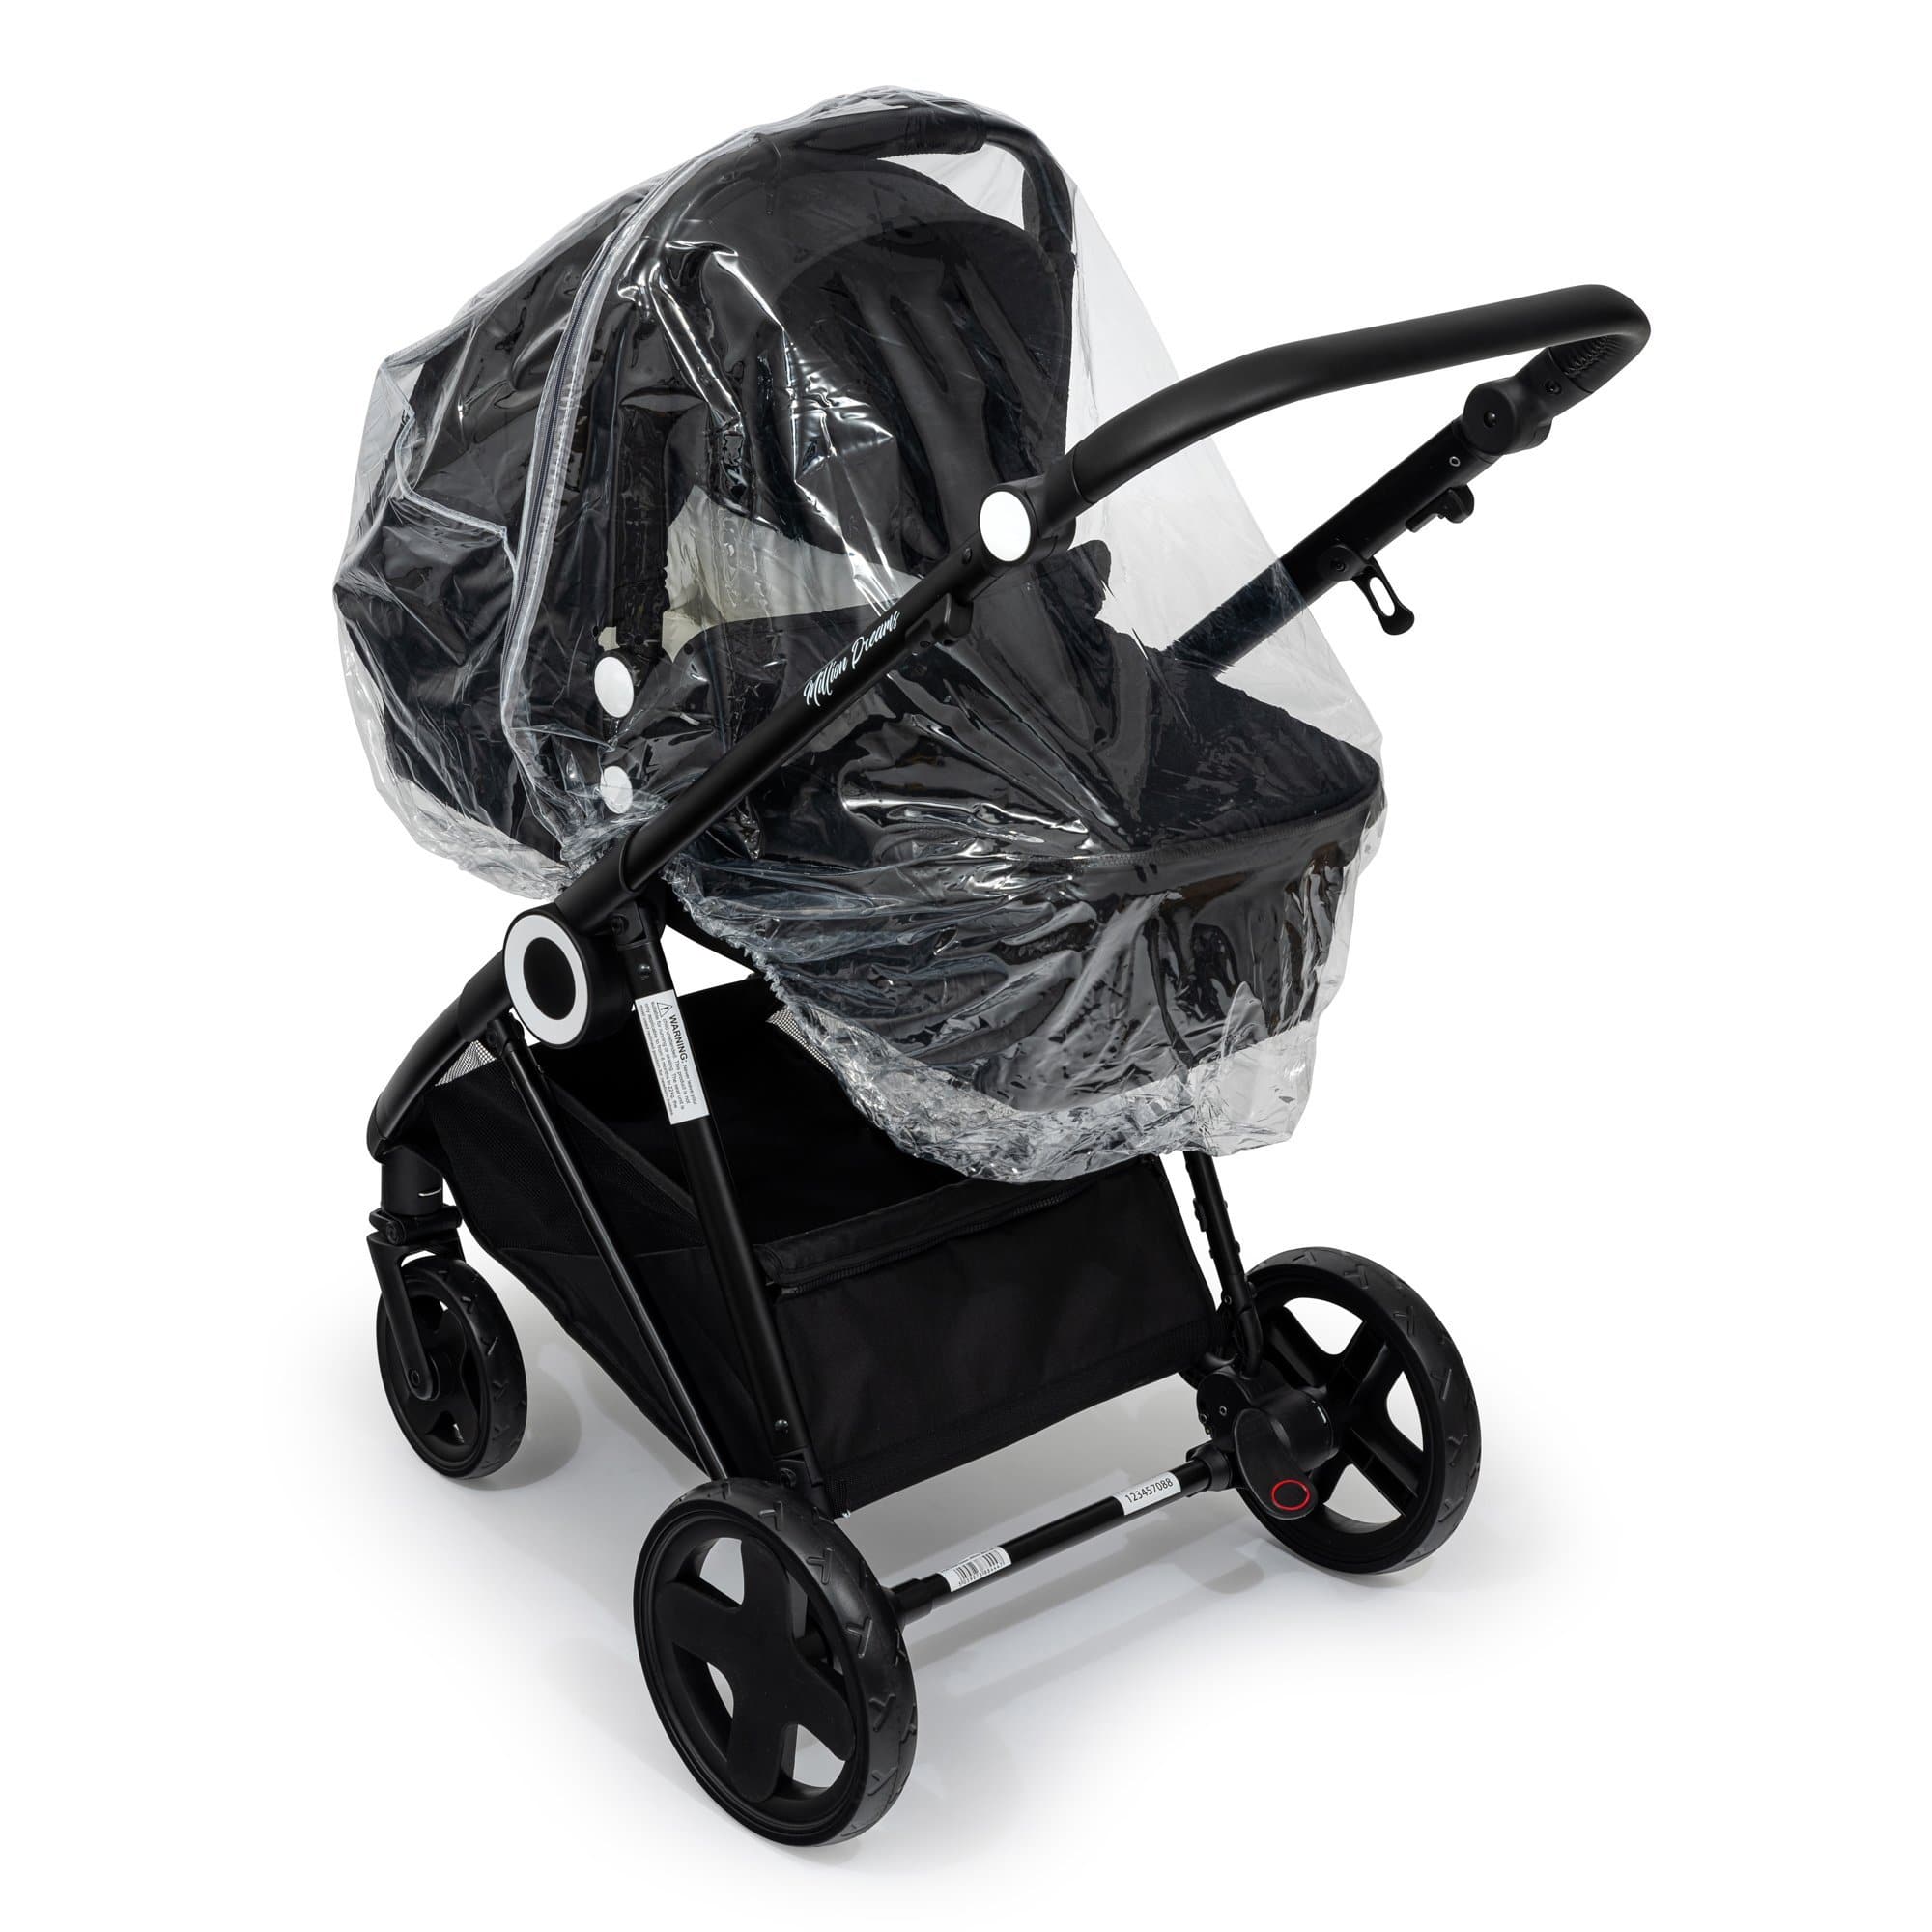 2 in 1 Rain Cover Compatible with Valco - Fits All Models - For Your Little One